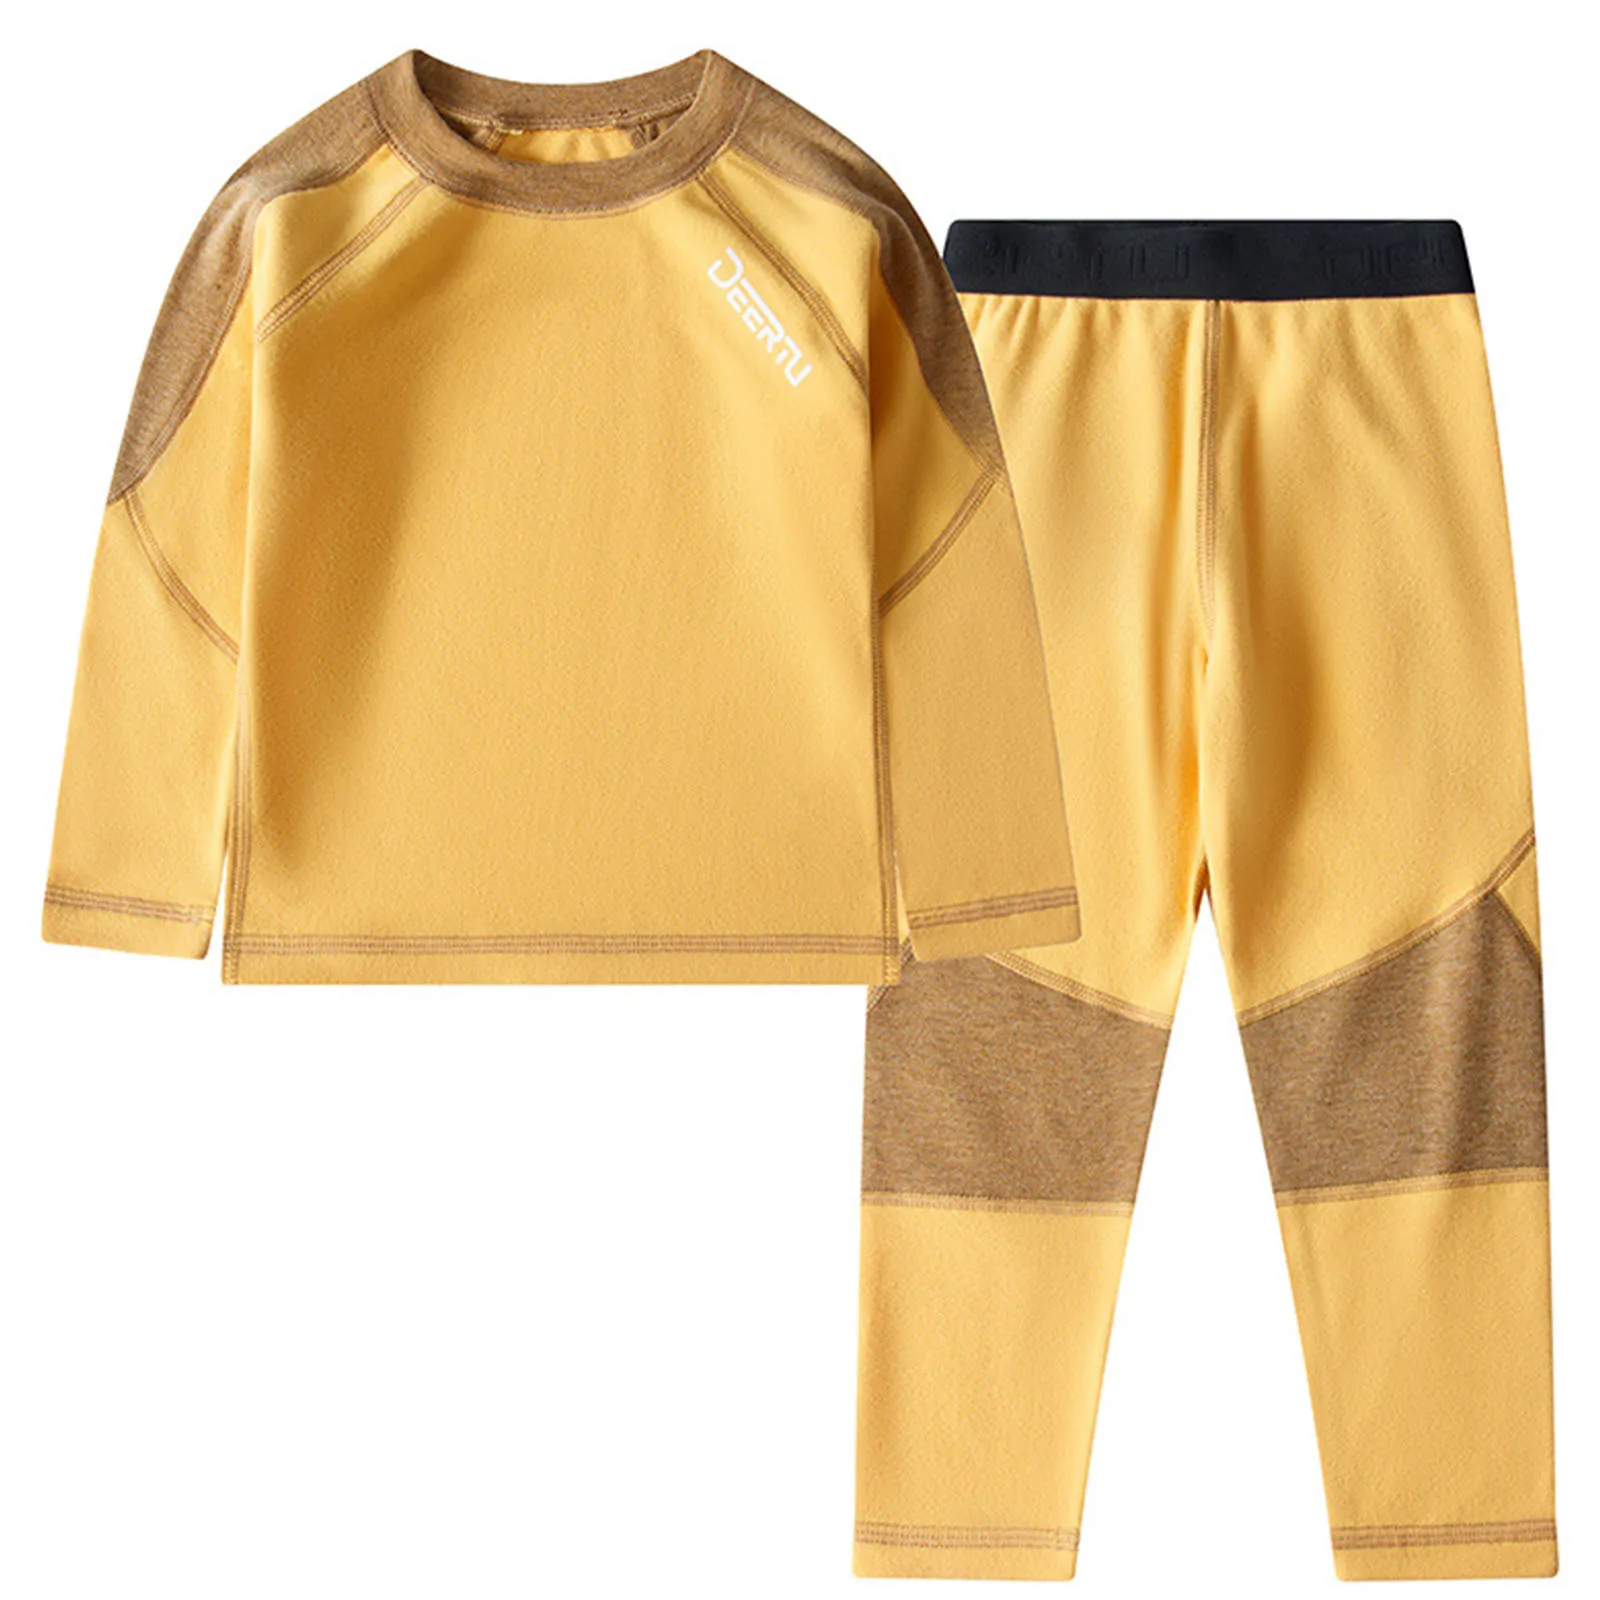 What is Boys and Girls Thermal Underwear Set